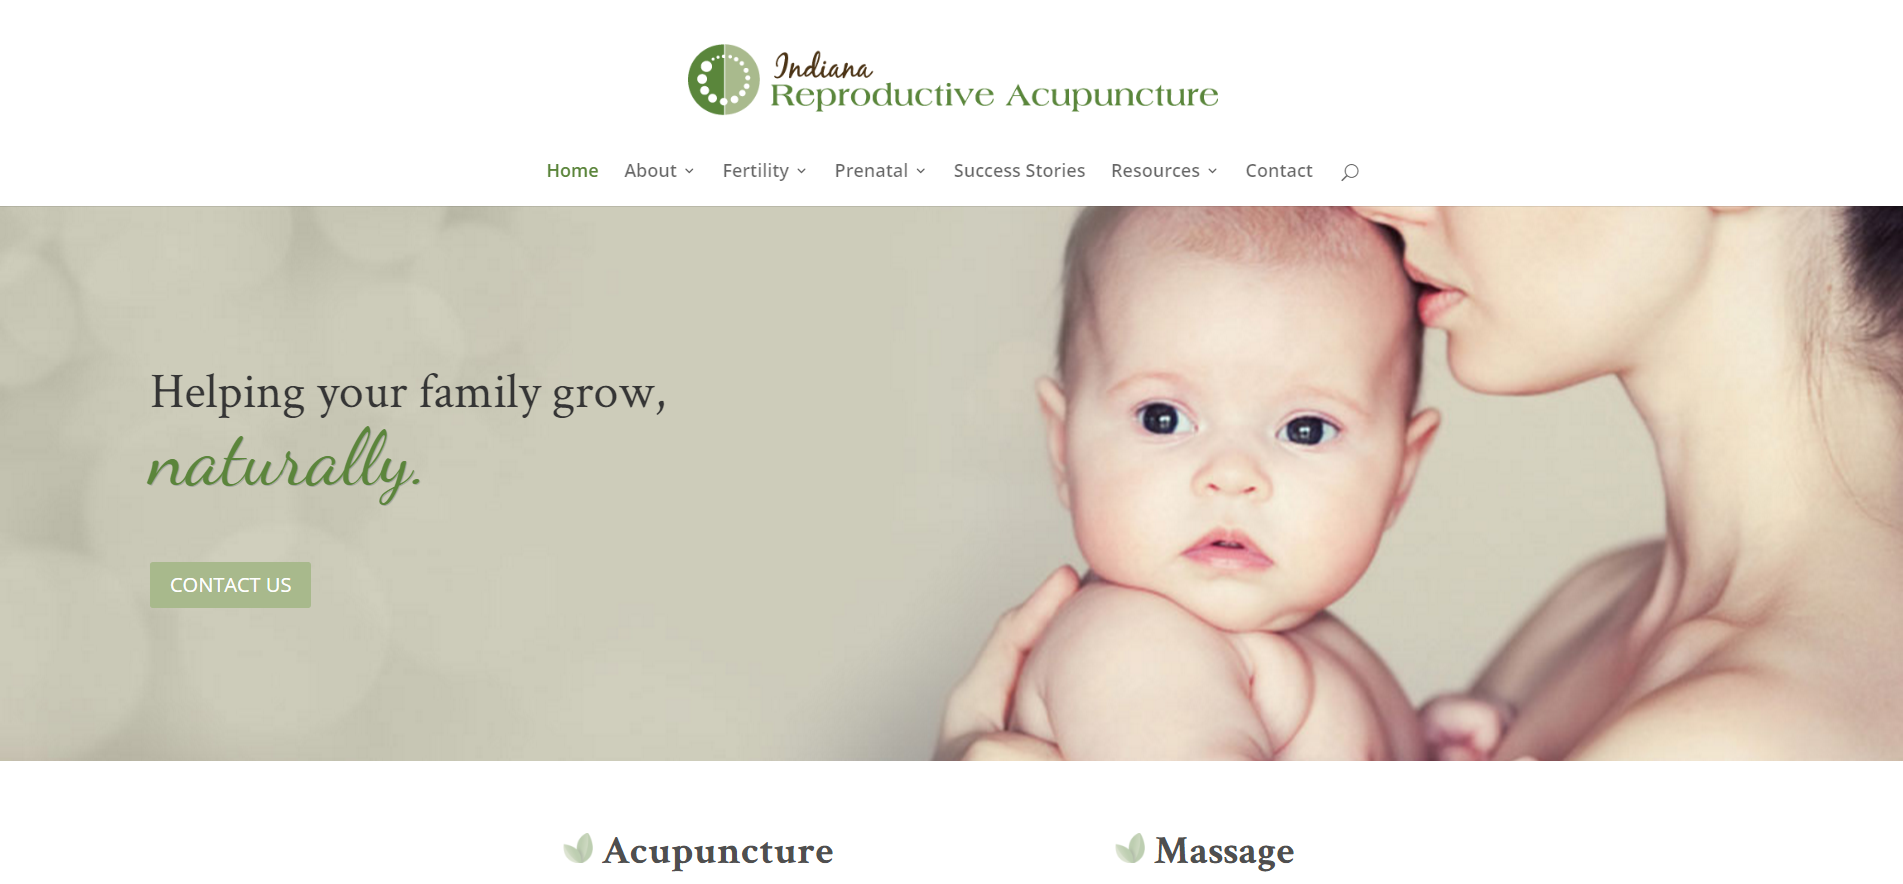 Home Indiana Reproductive Acupuncture Massage Partial